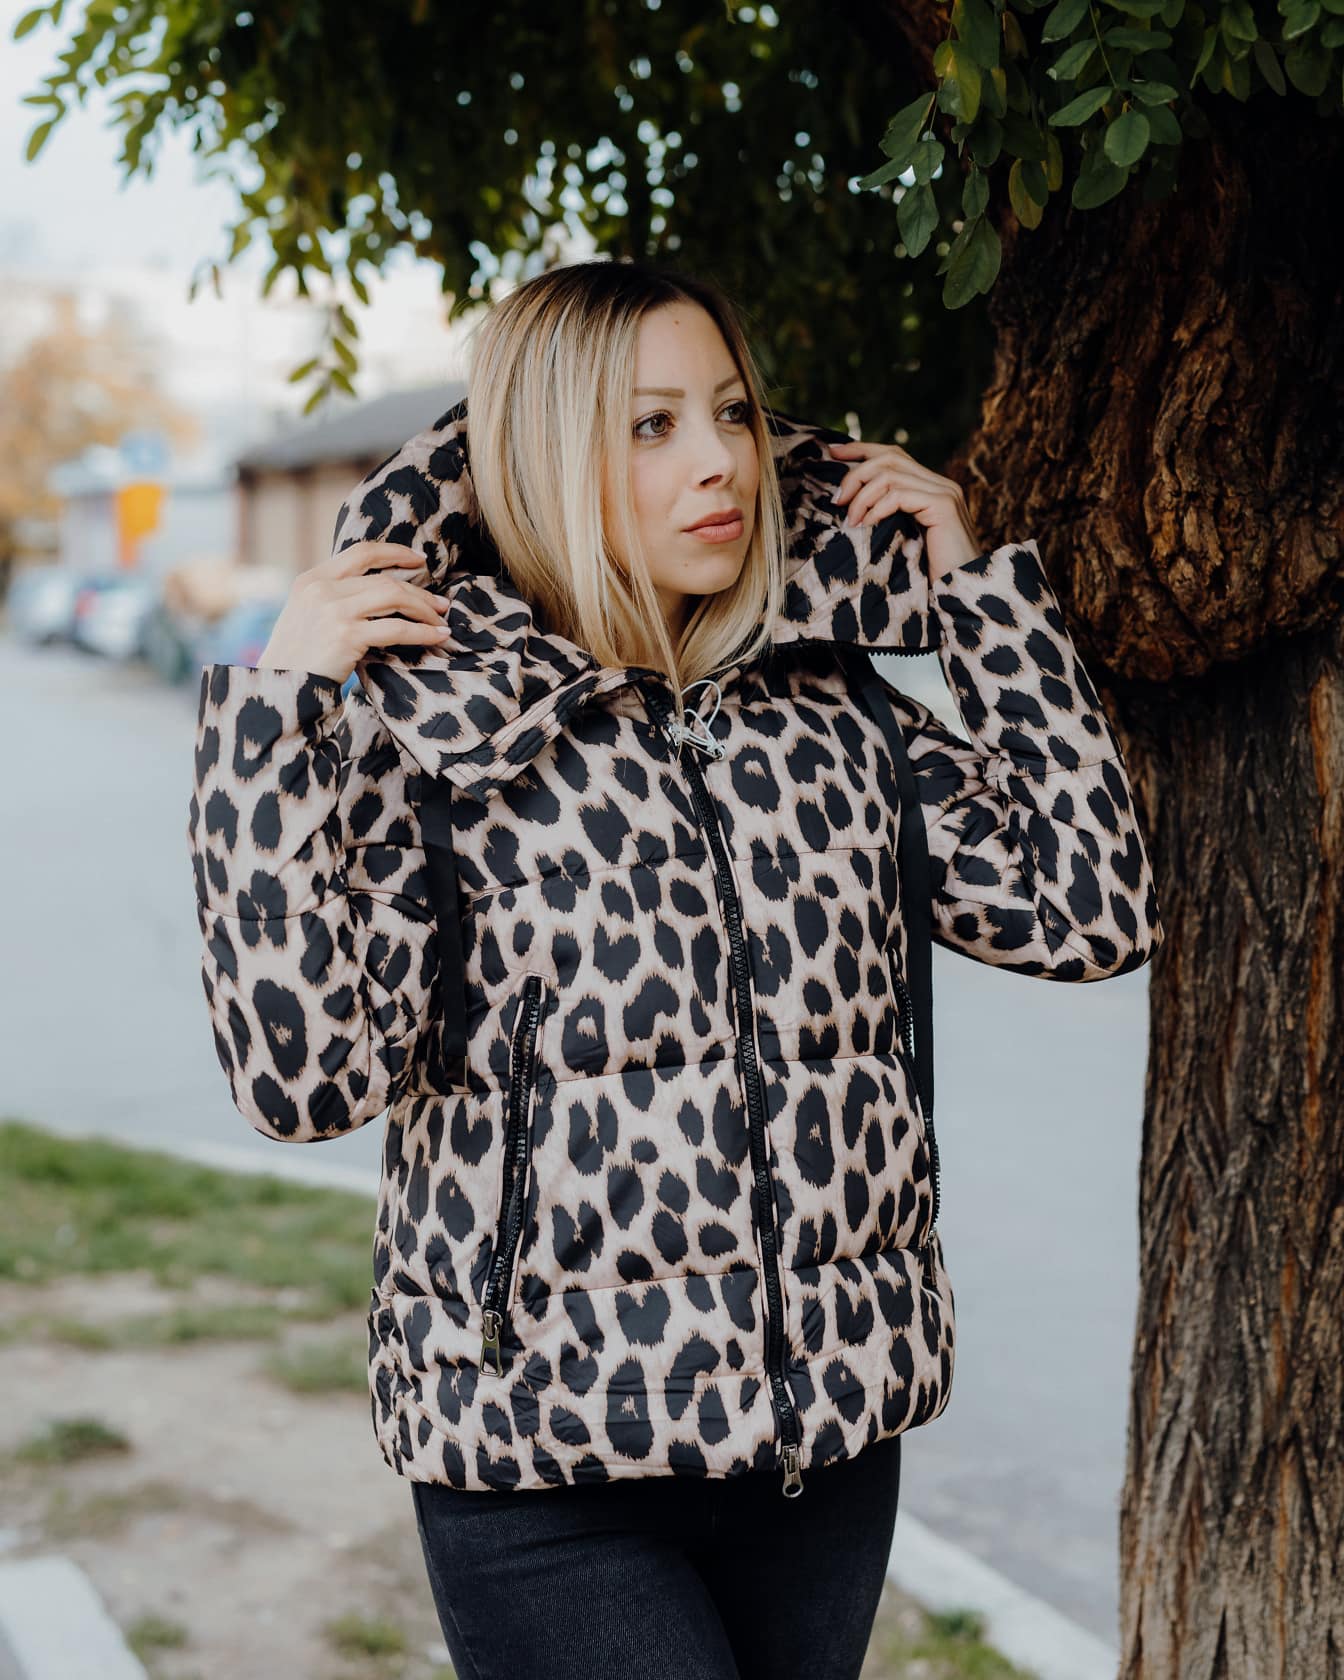 Woman fashion model in a modern jacket with a design of leopard skin